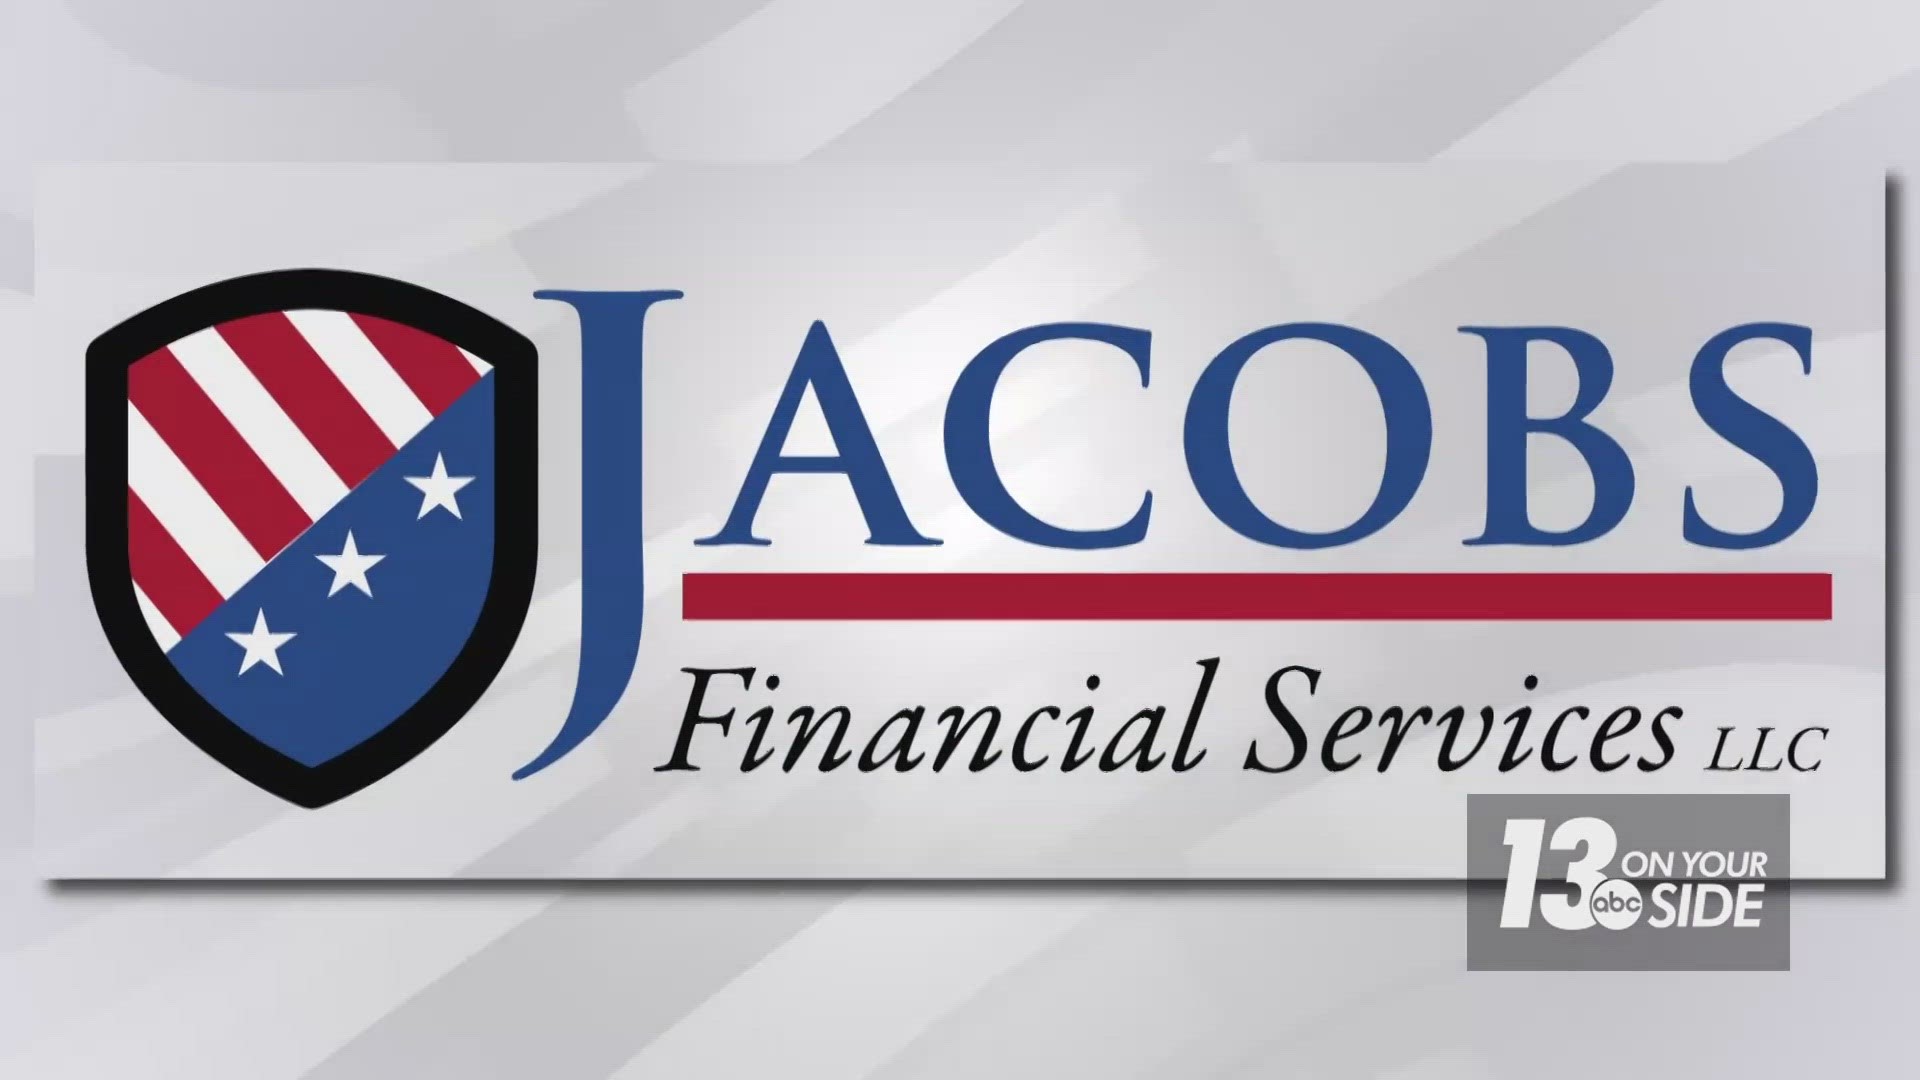 Tom Jacobs, from Jacobs Financial Services, can help you prepare for retirement.